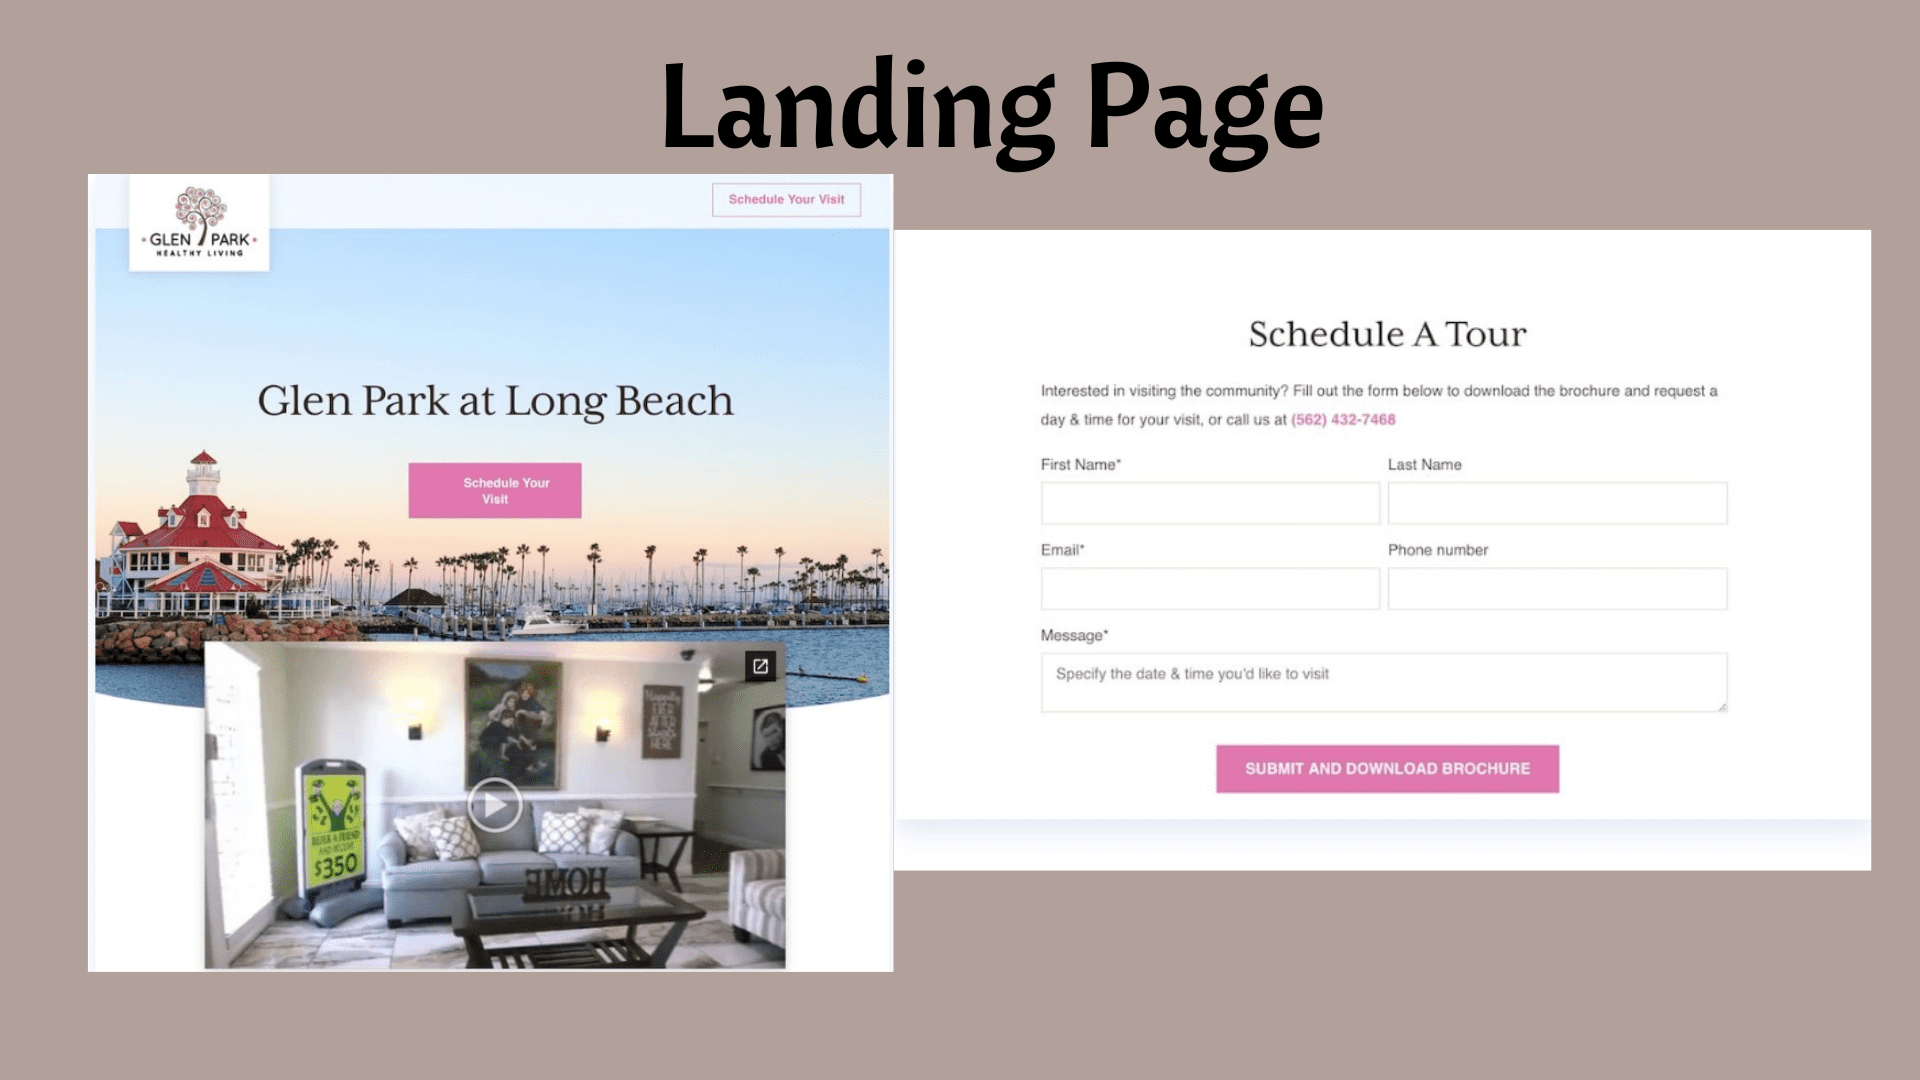 The UX landing page